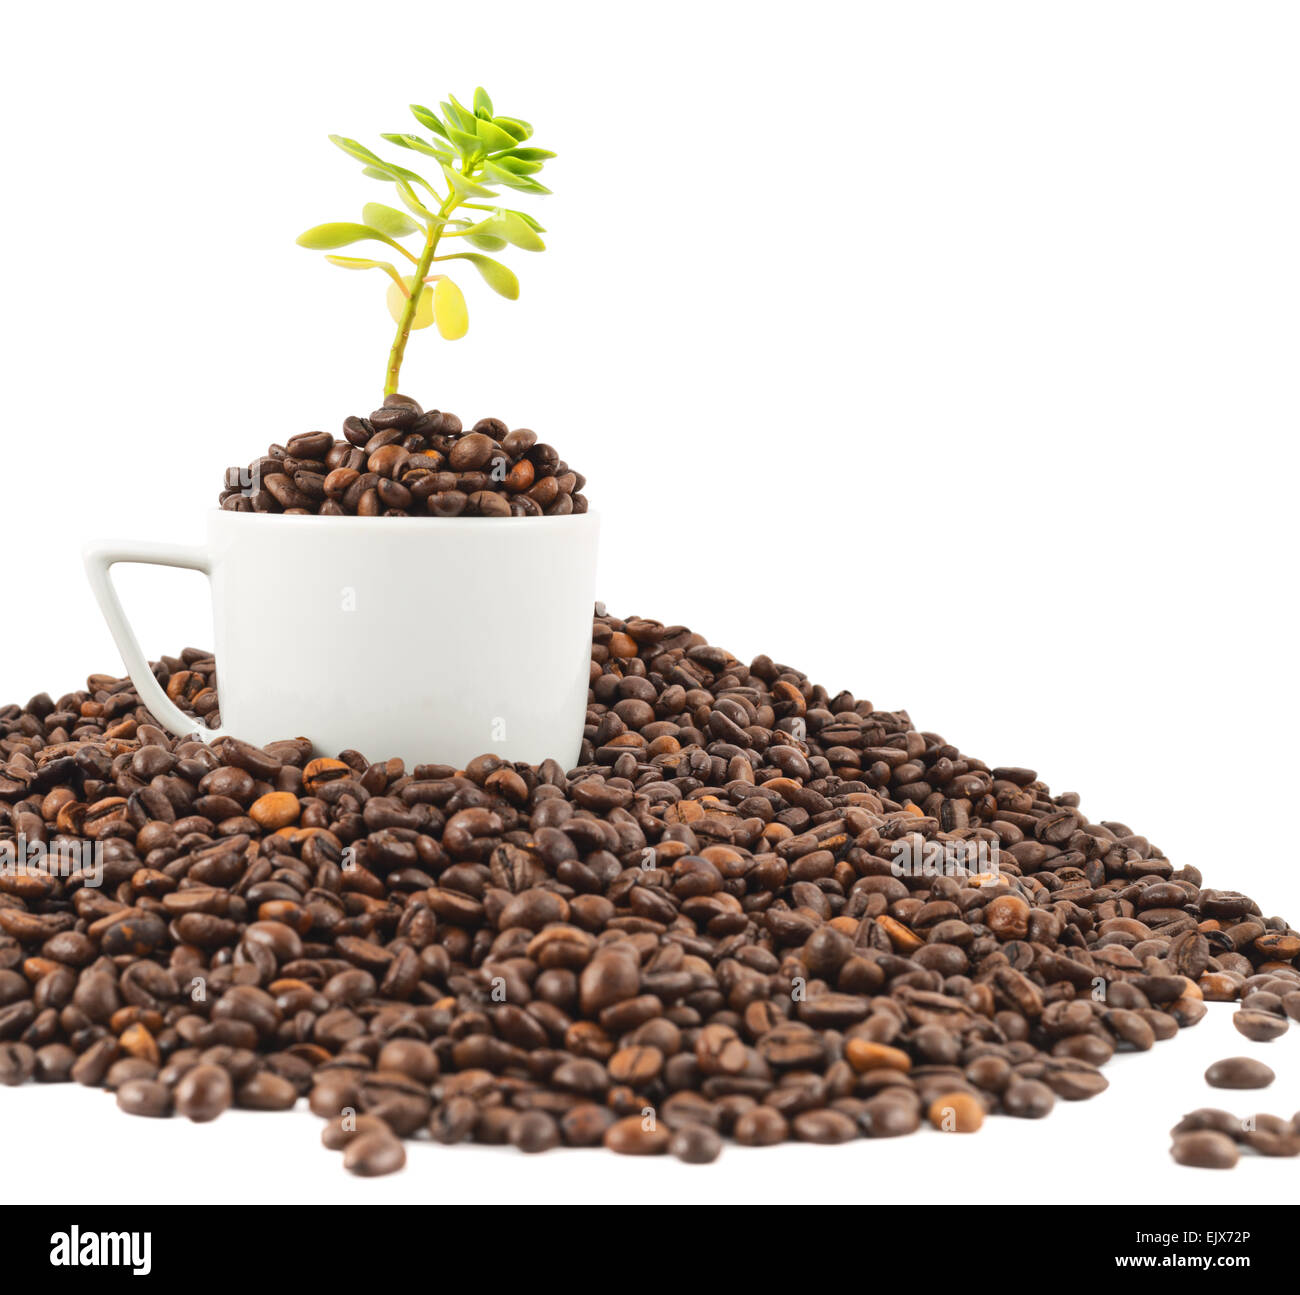 Green Plant Growing From The Coffee Beans EJX72P 